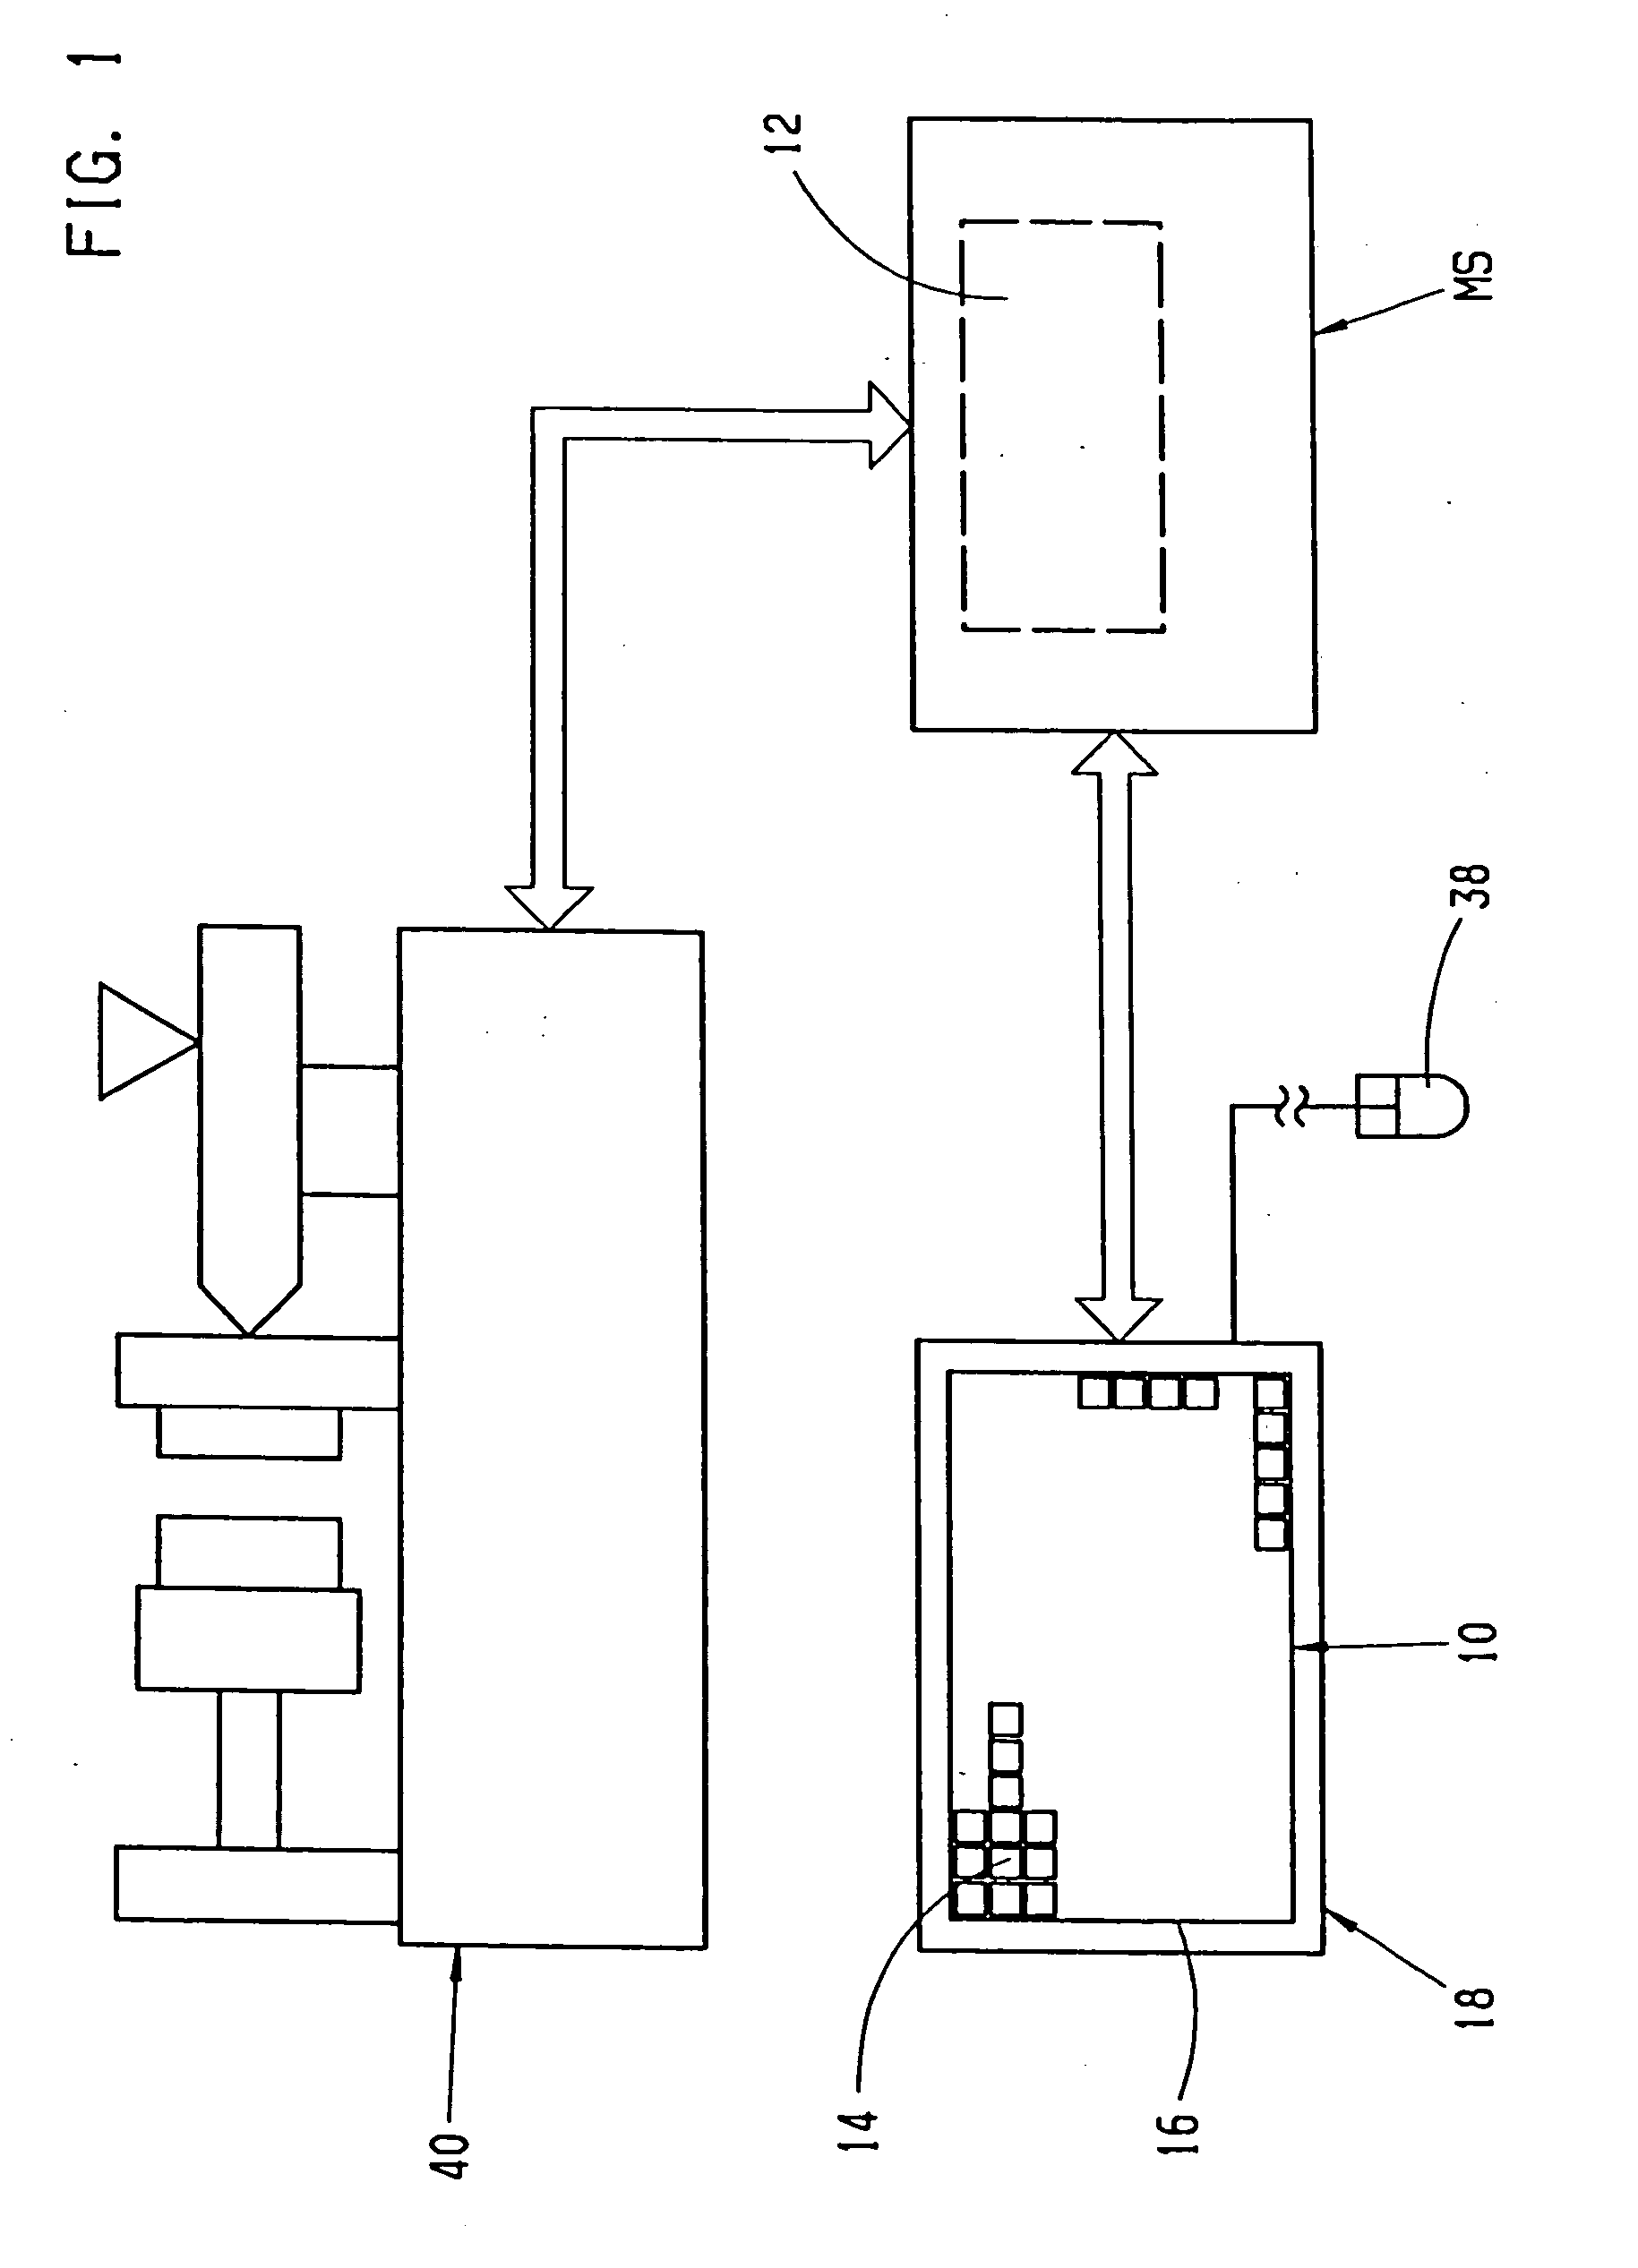 Method and device for interactive control of a machine